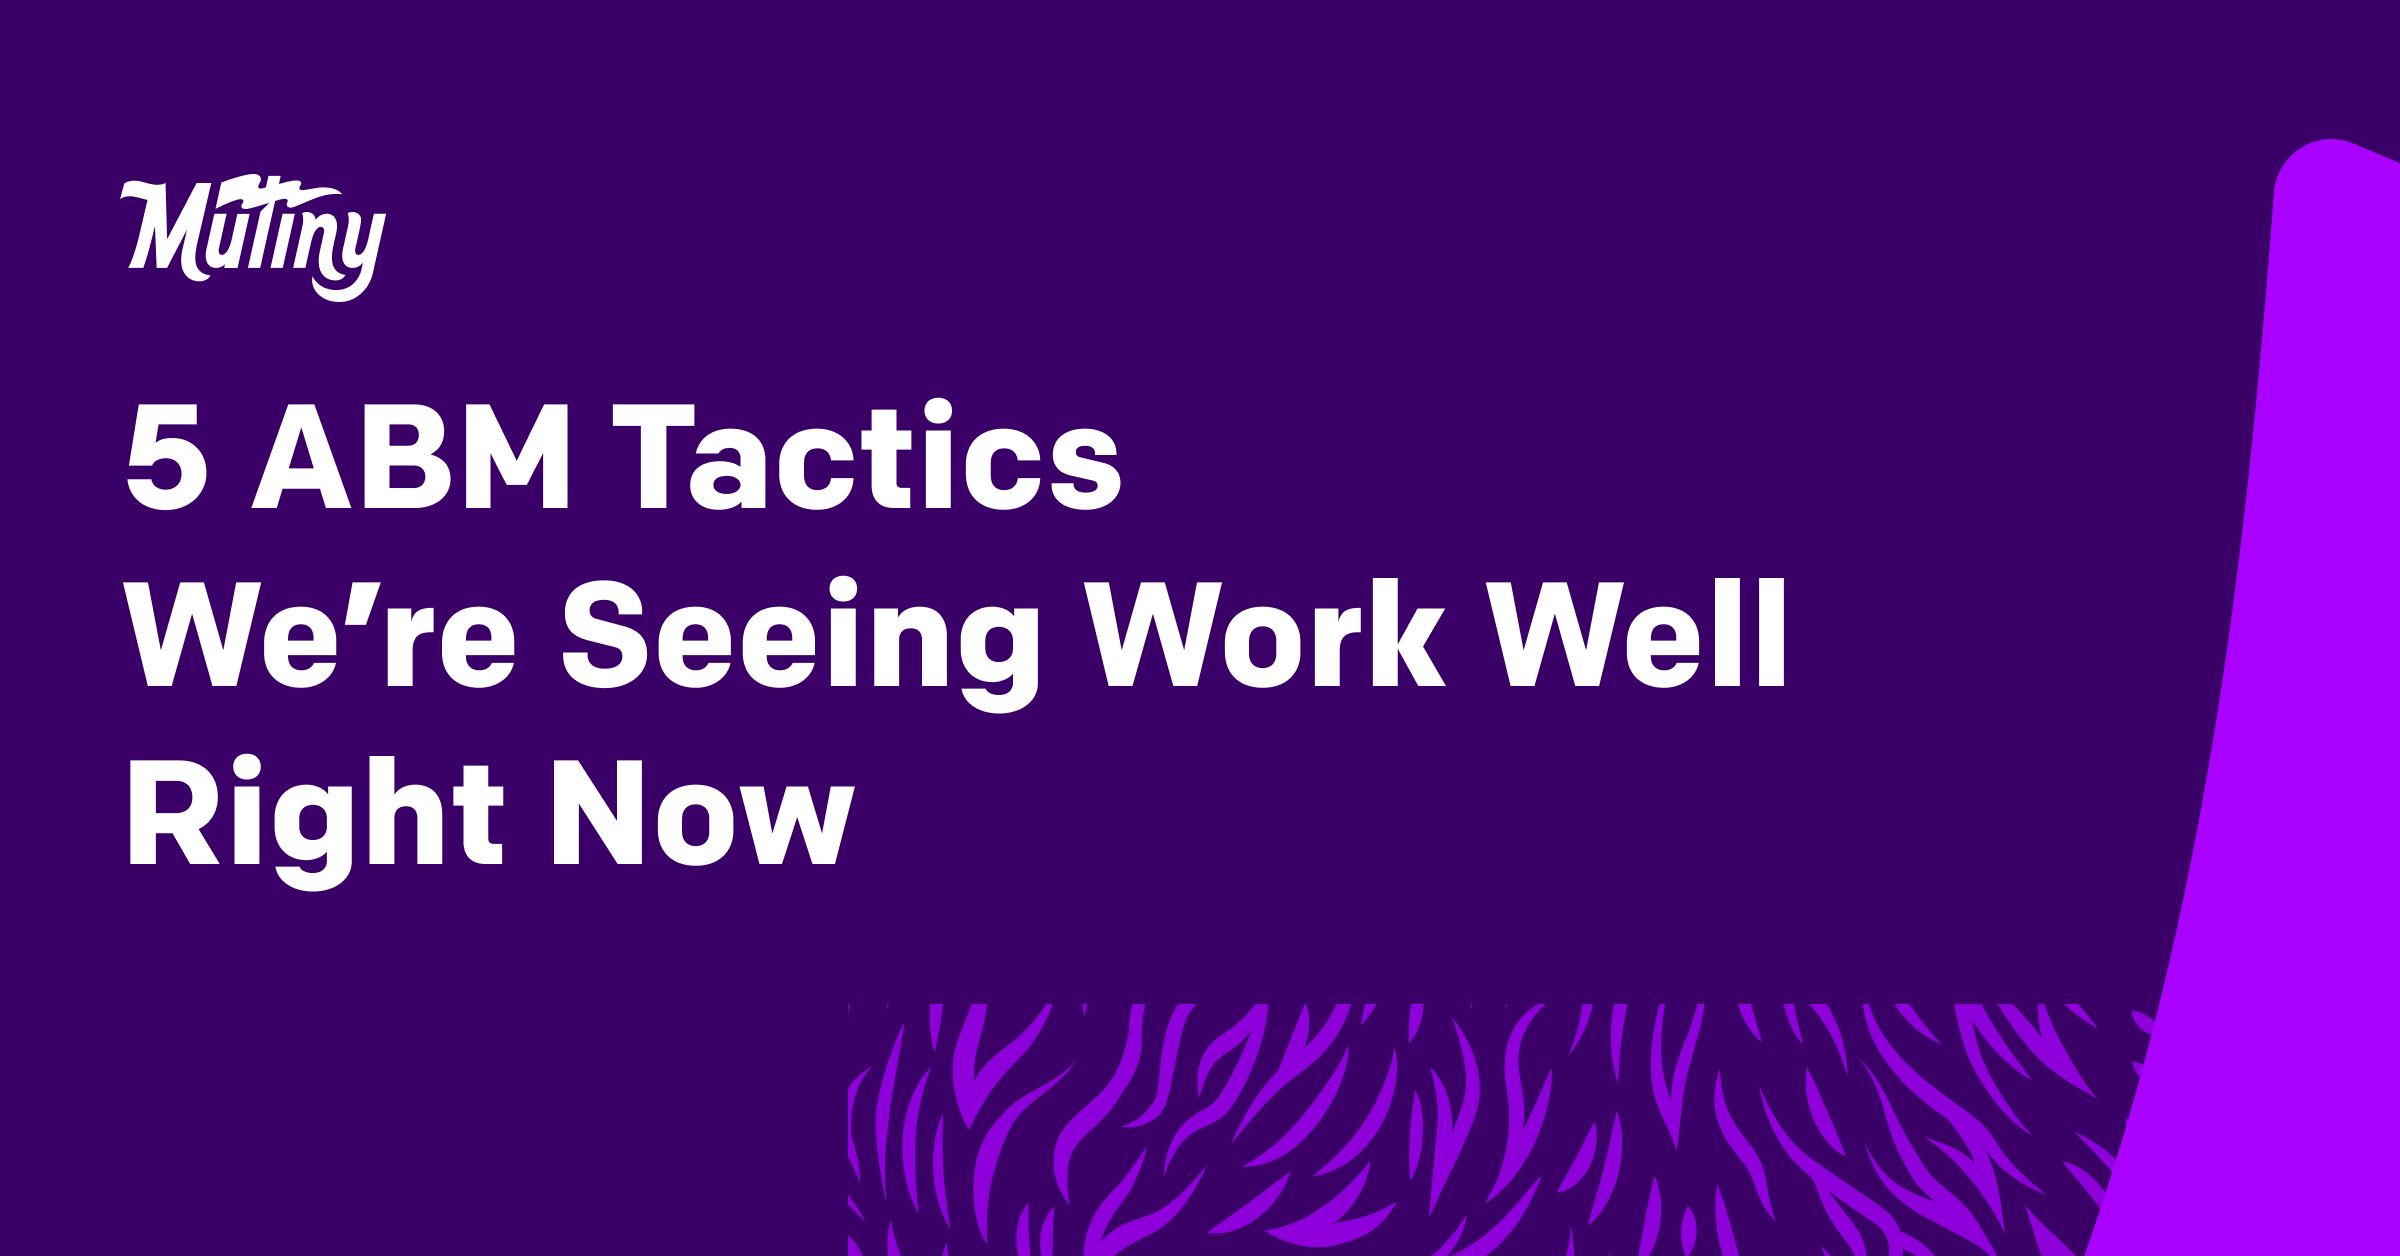 5 ABM Tactics We’re Seeing Work Well Right Now